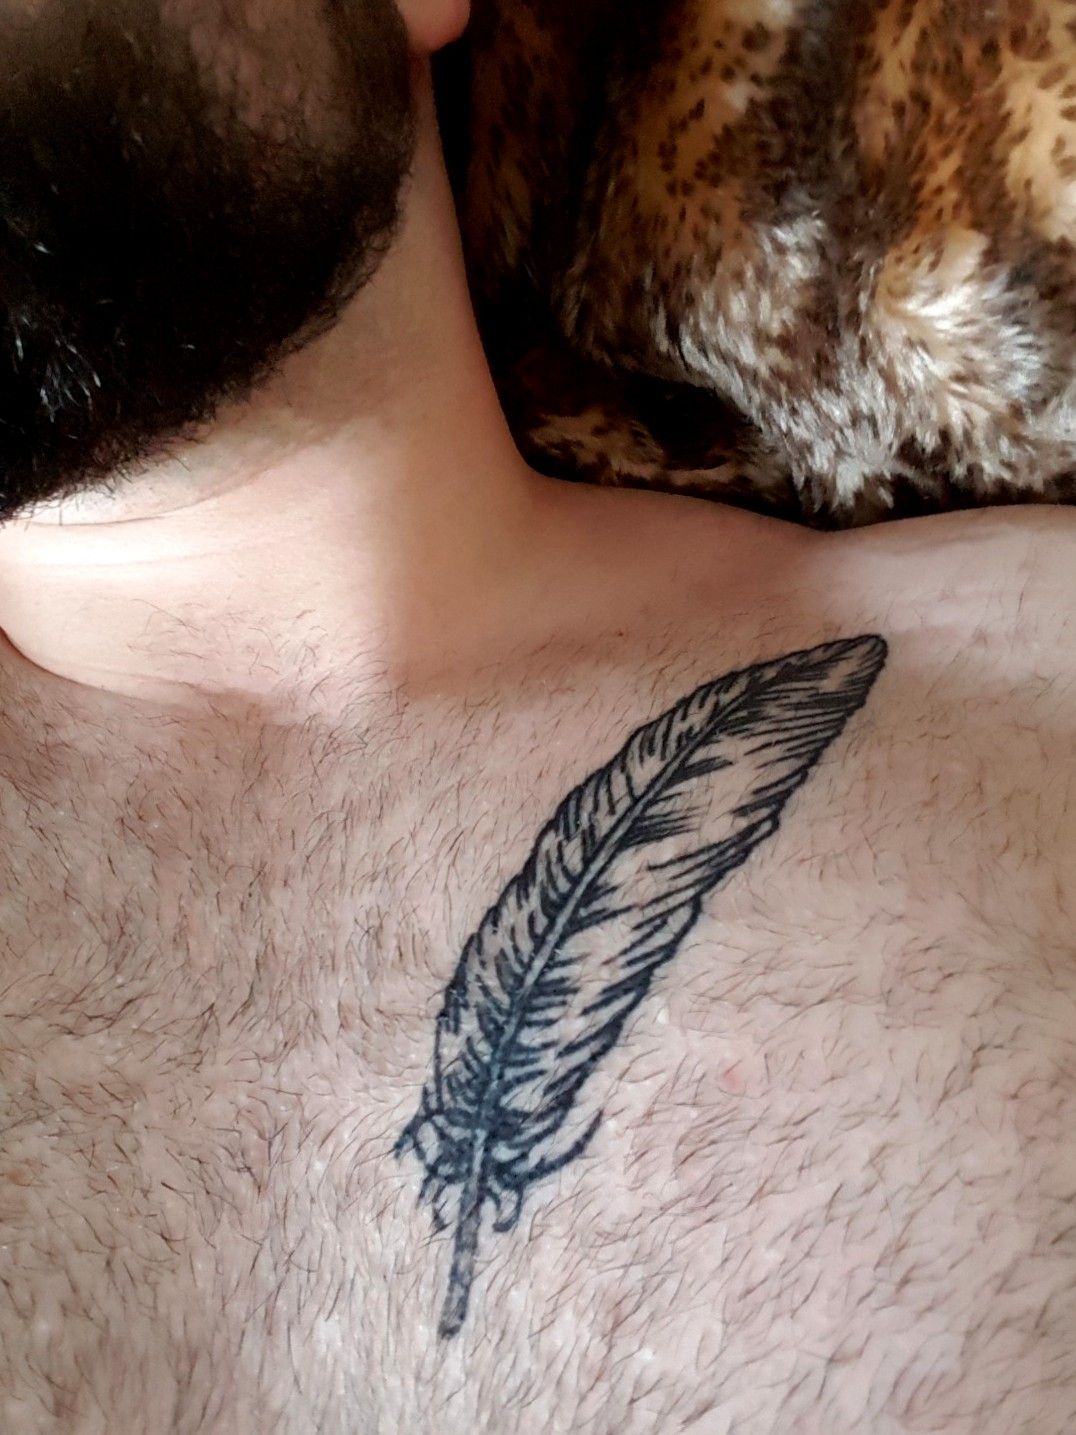 Tattoo uploaded by Jack C • Feather tattoo, linework on chest. #feather #nature #love #golondrina • Tattoodo